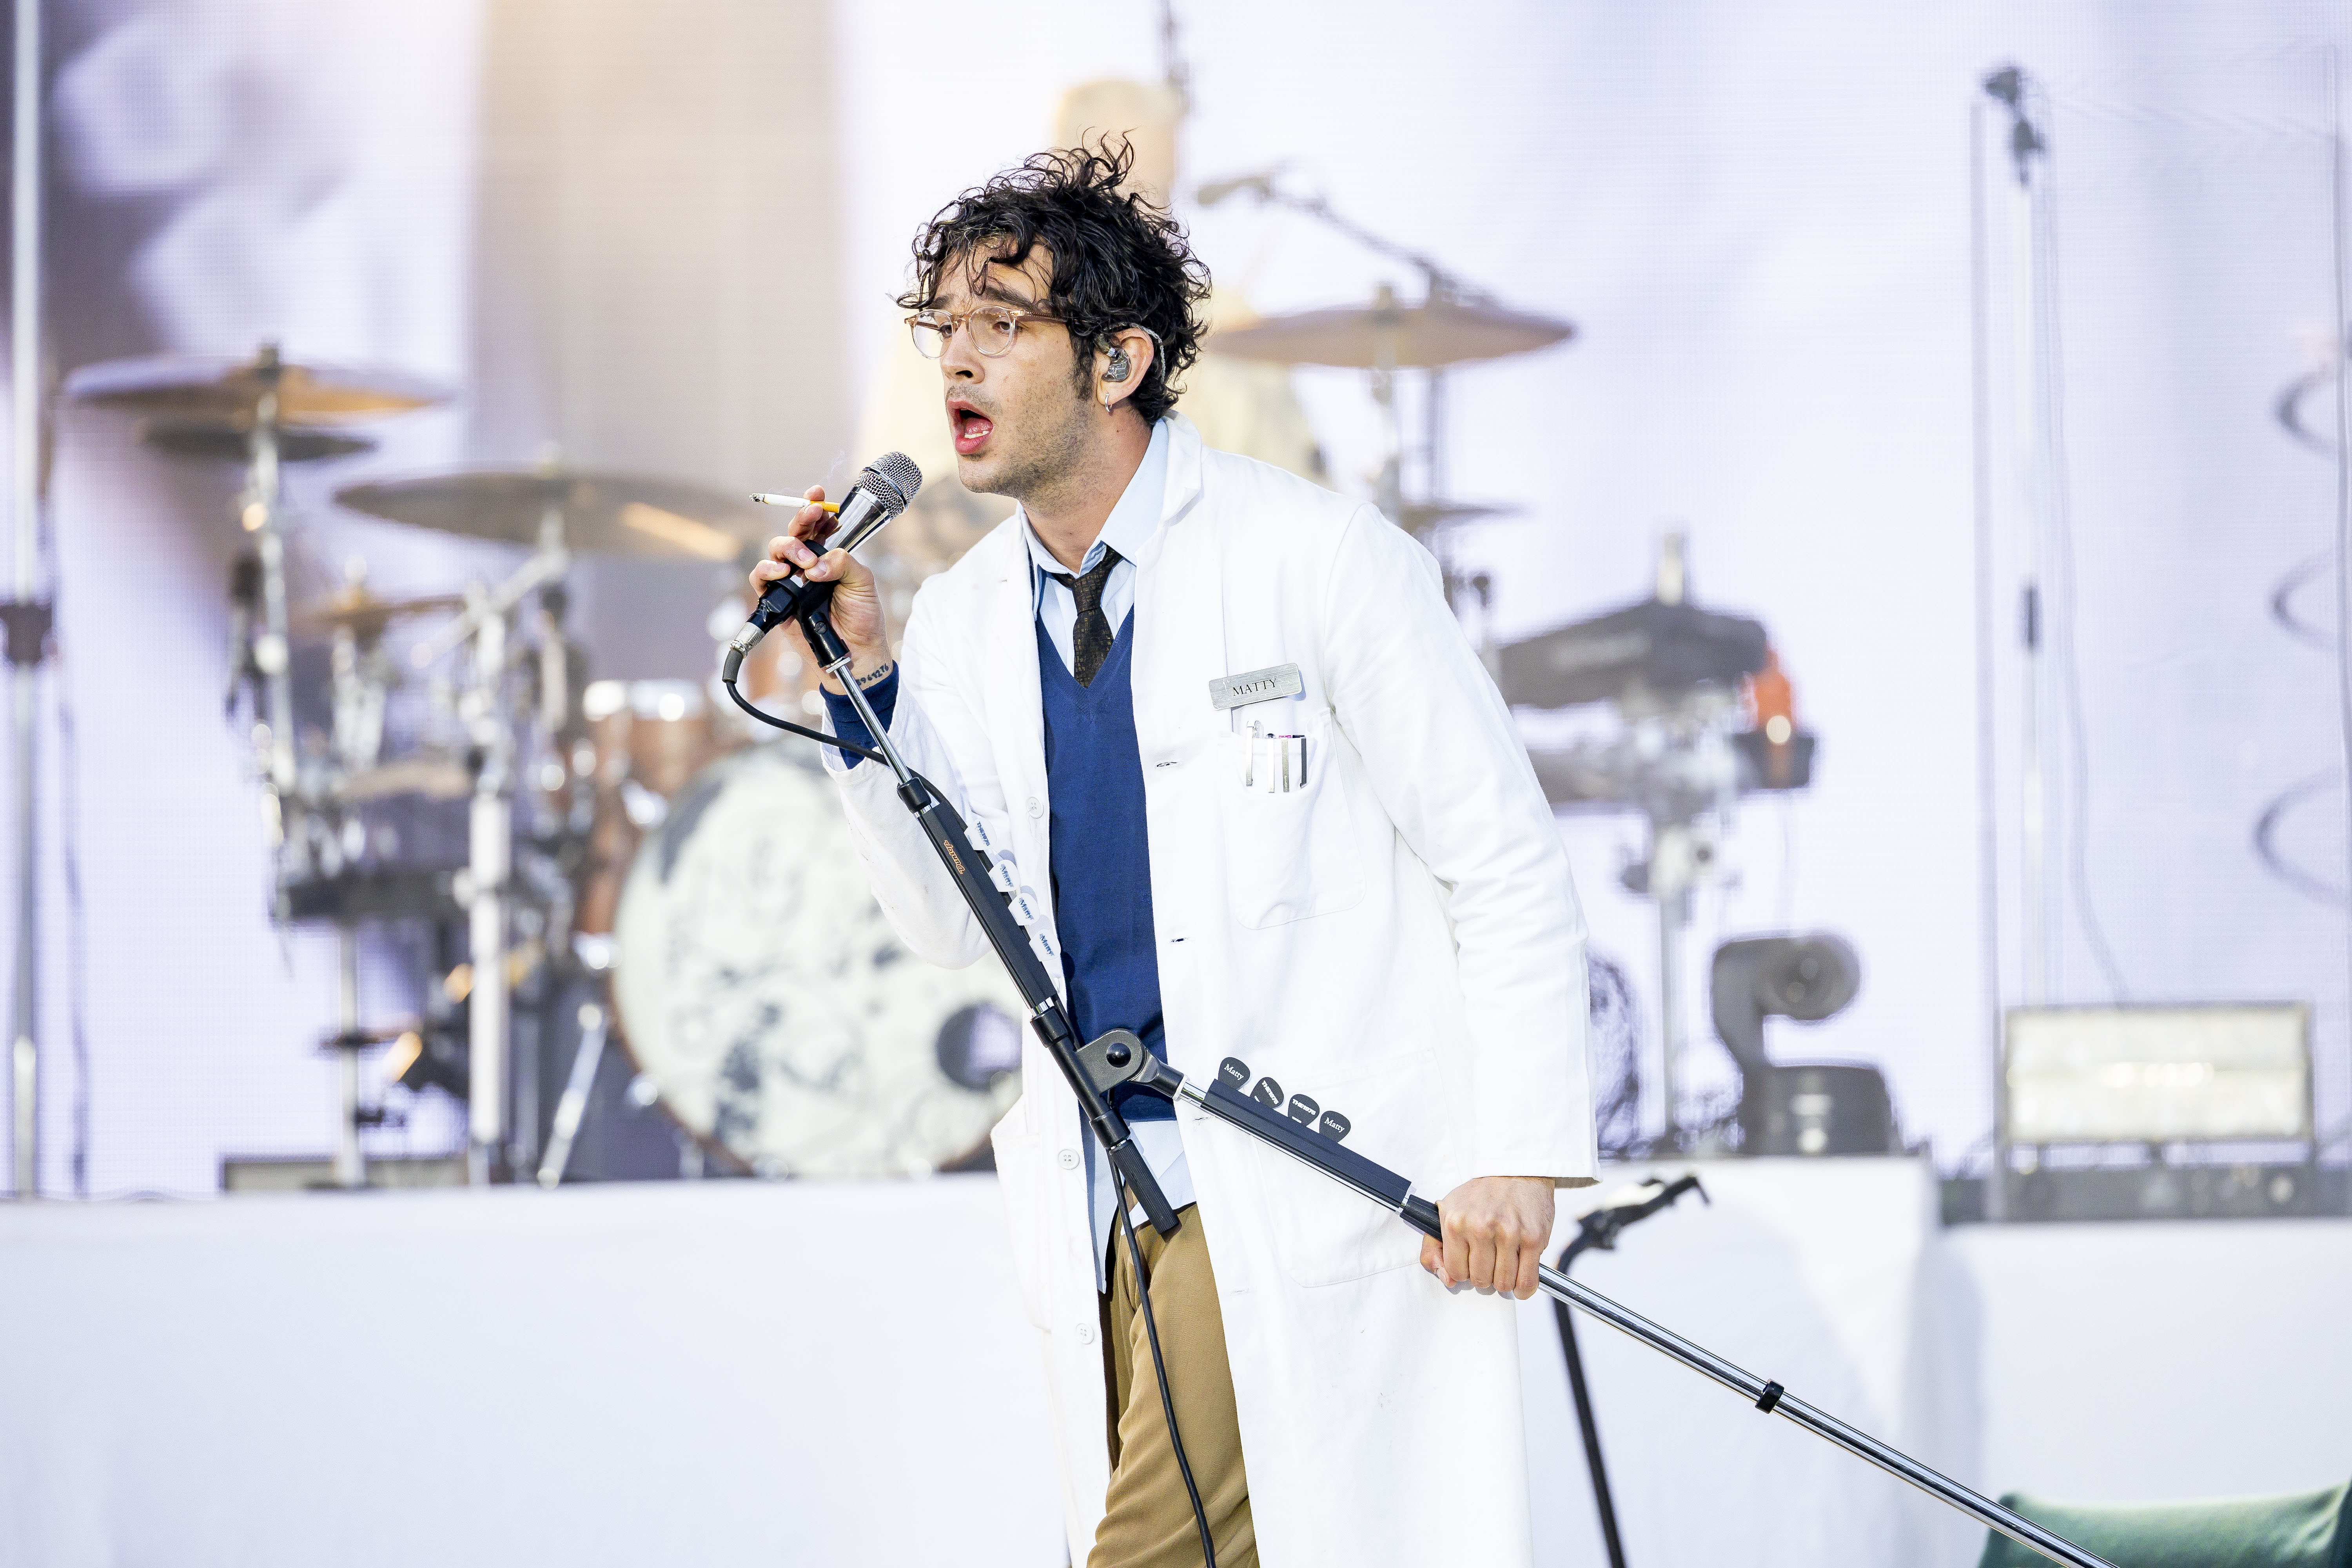 Matty Healy's white lab coat gets a reference